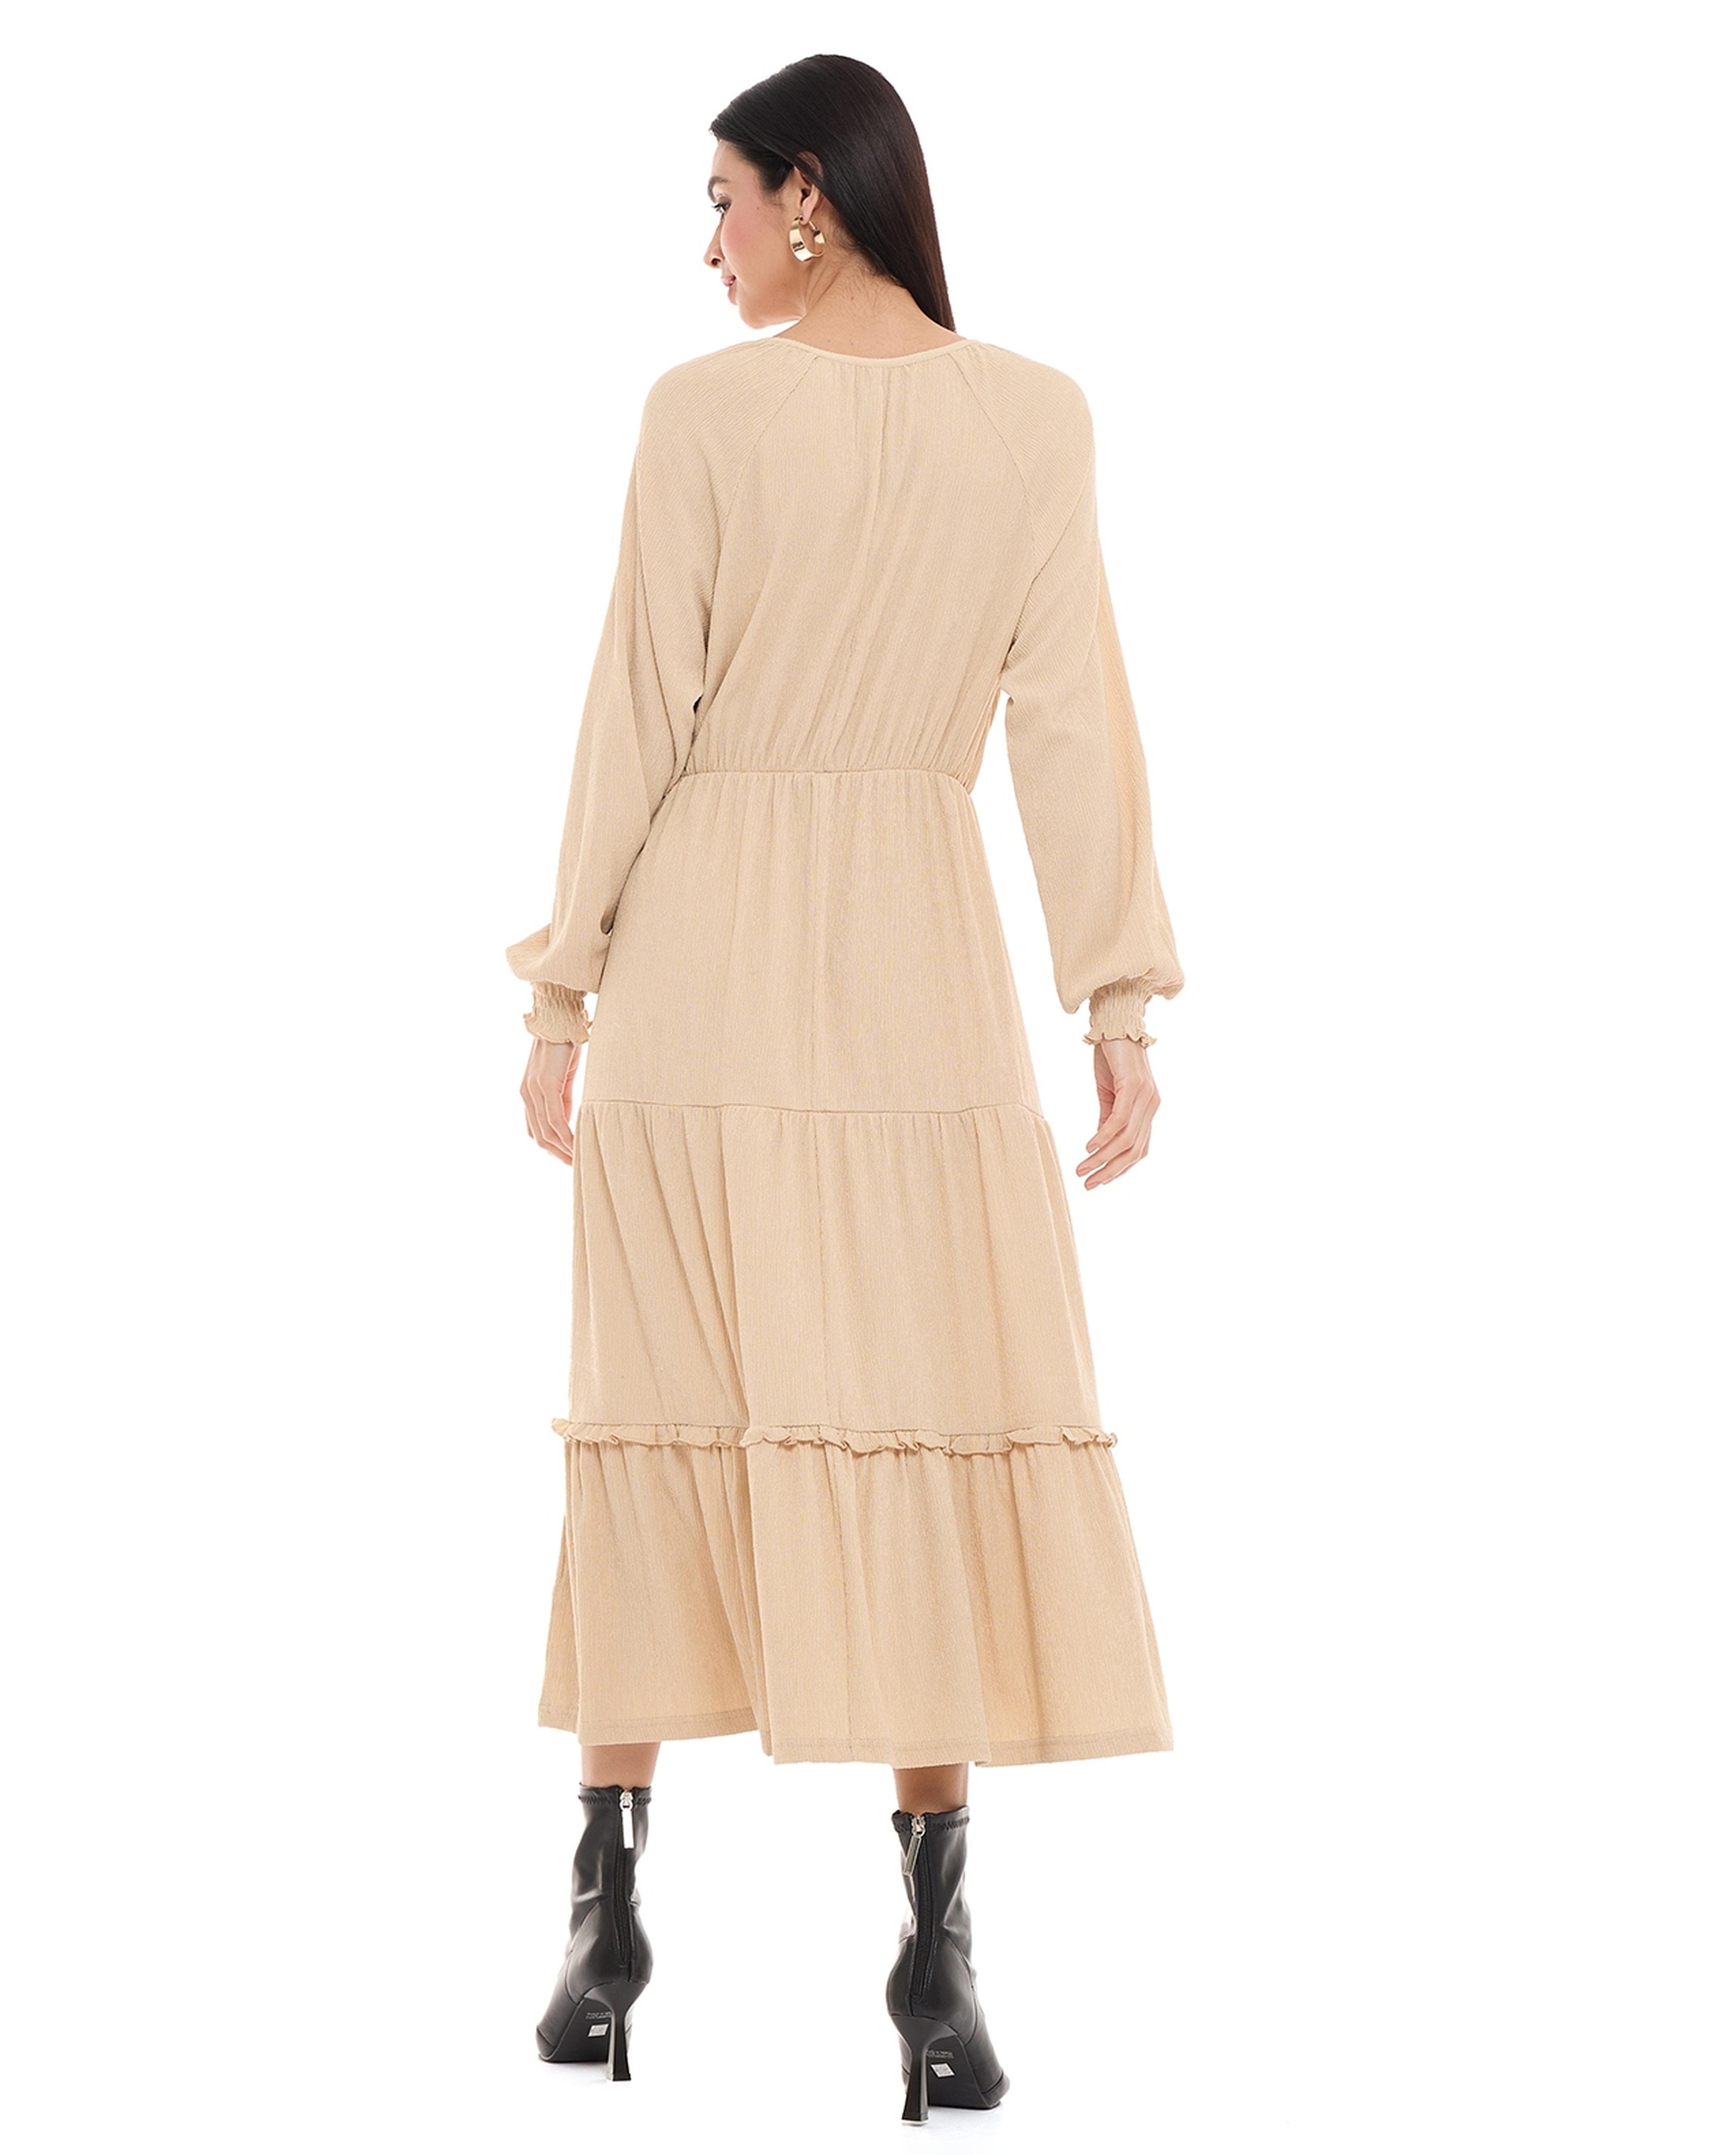 Solid Tiered Dress with Tie-Up Neck and Bishop Sleeves